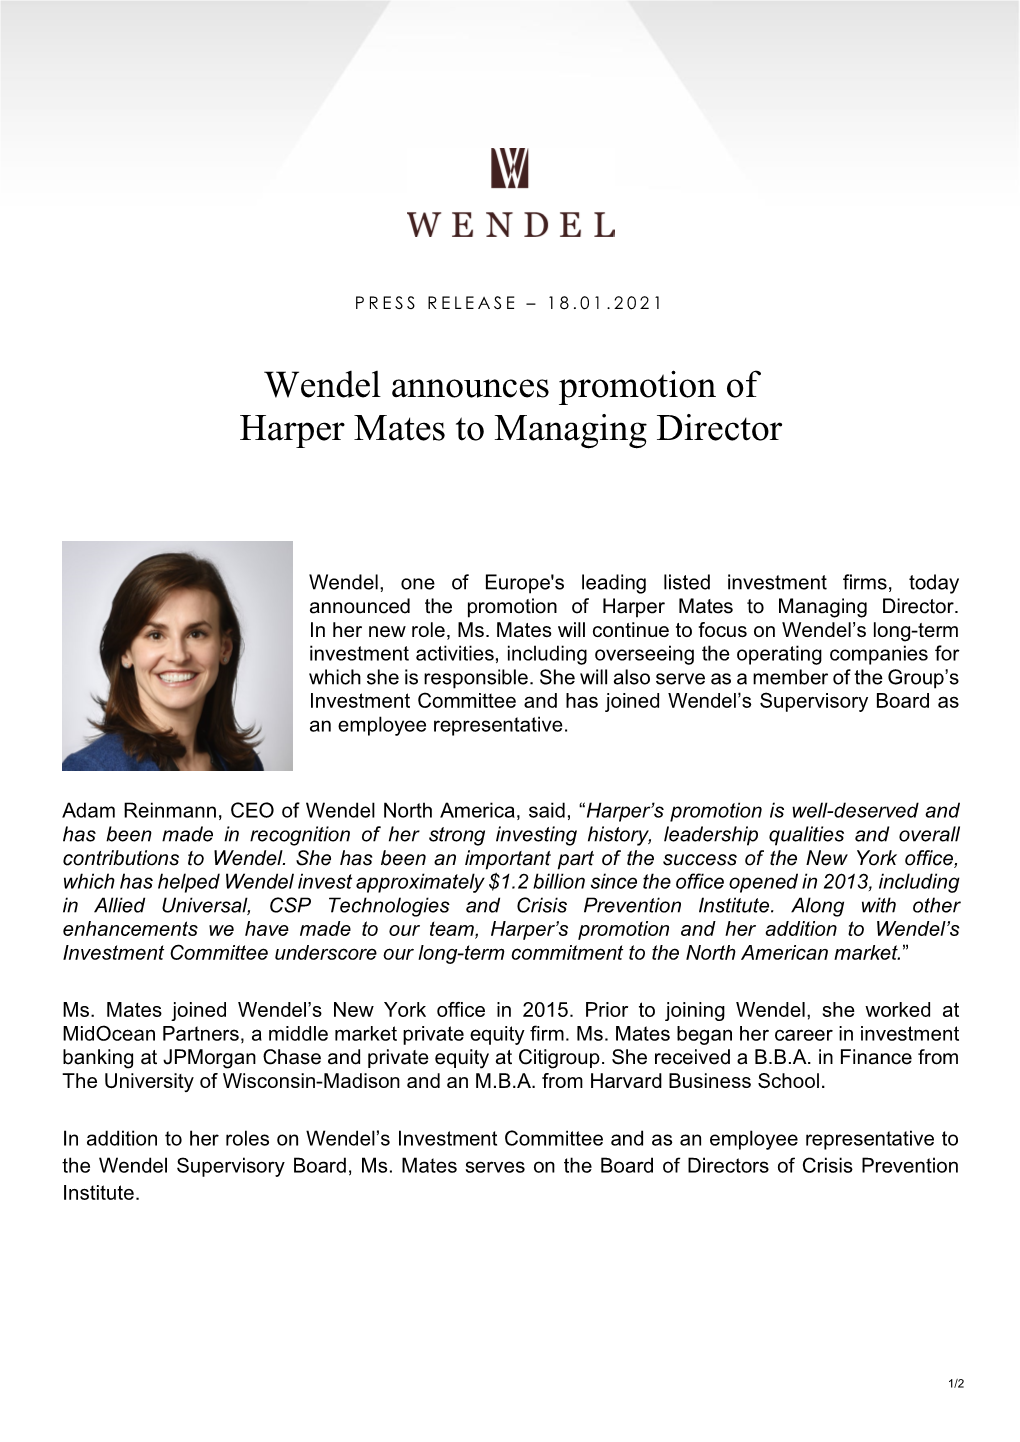 Wendel Announces Promotion of Harper Mates to Managing Director